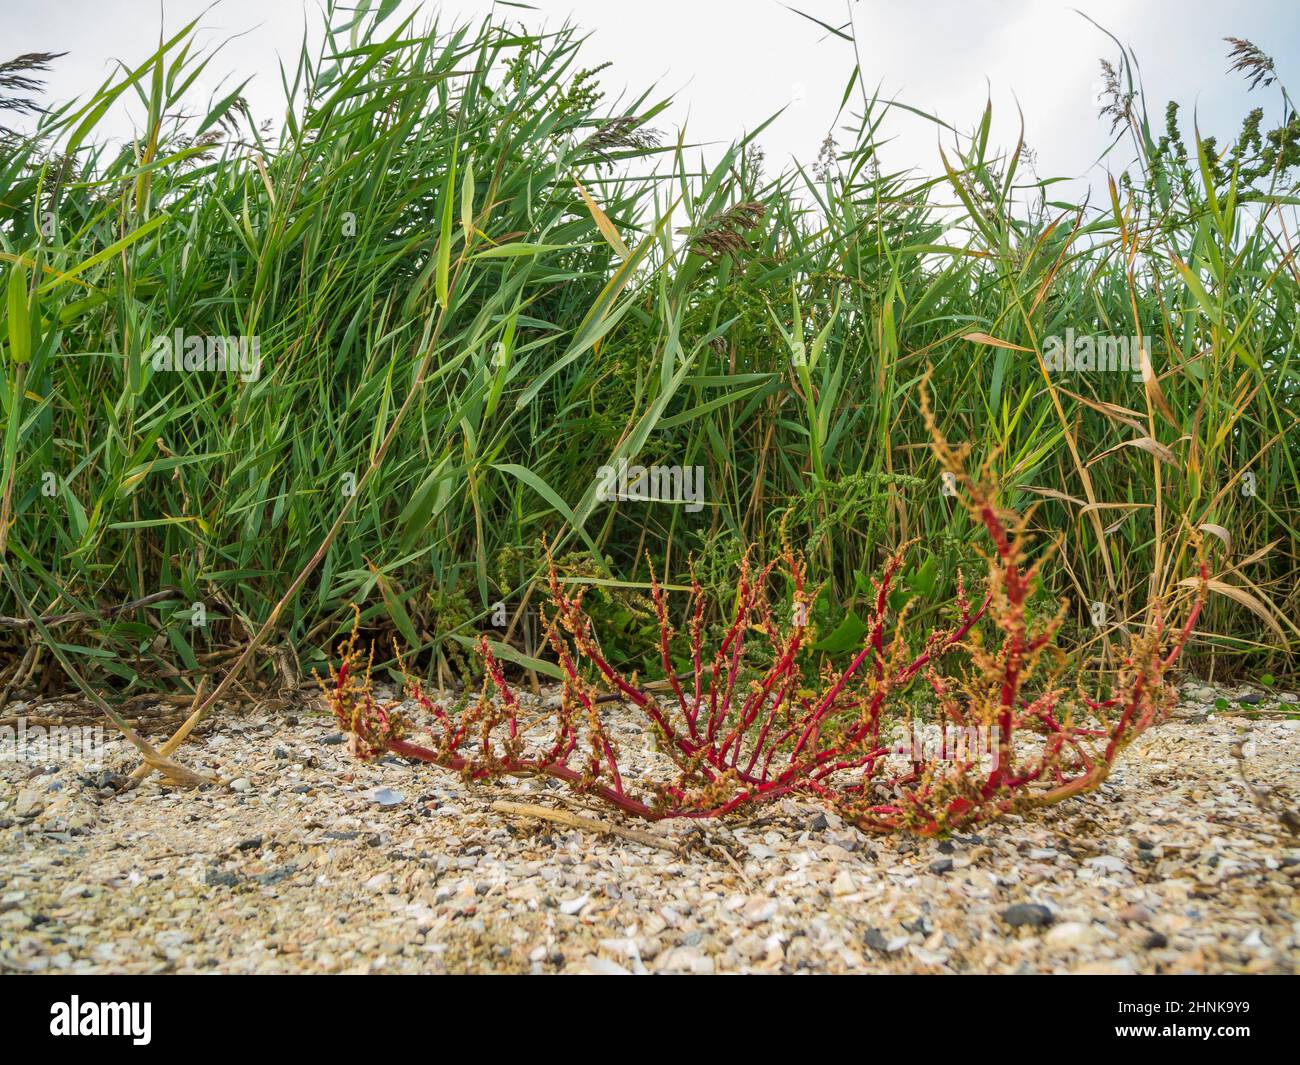 Close-up view of a beach sod (lat: Suaeda maritima) plant in the salt marshes on sand strewn with mussel shells in front of broad-leaved grasses. Stock Photo